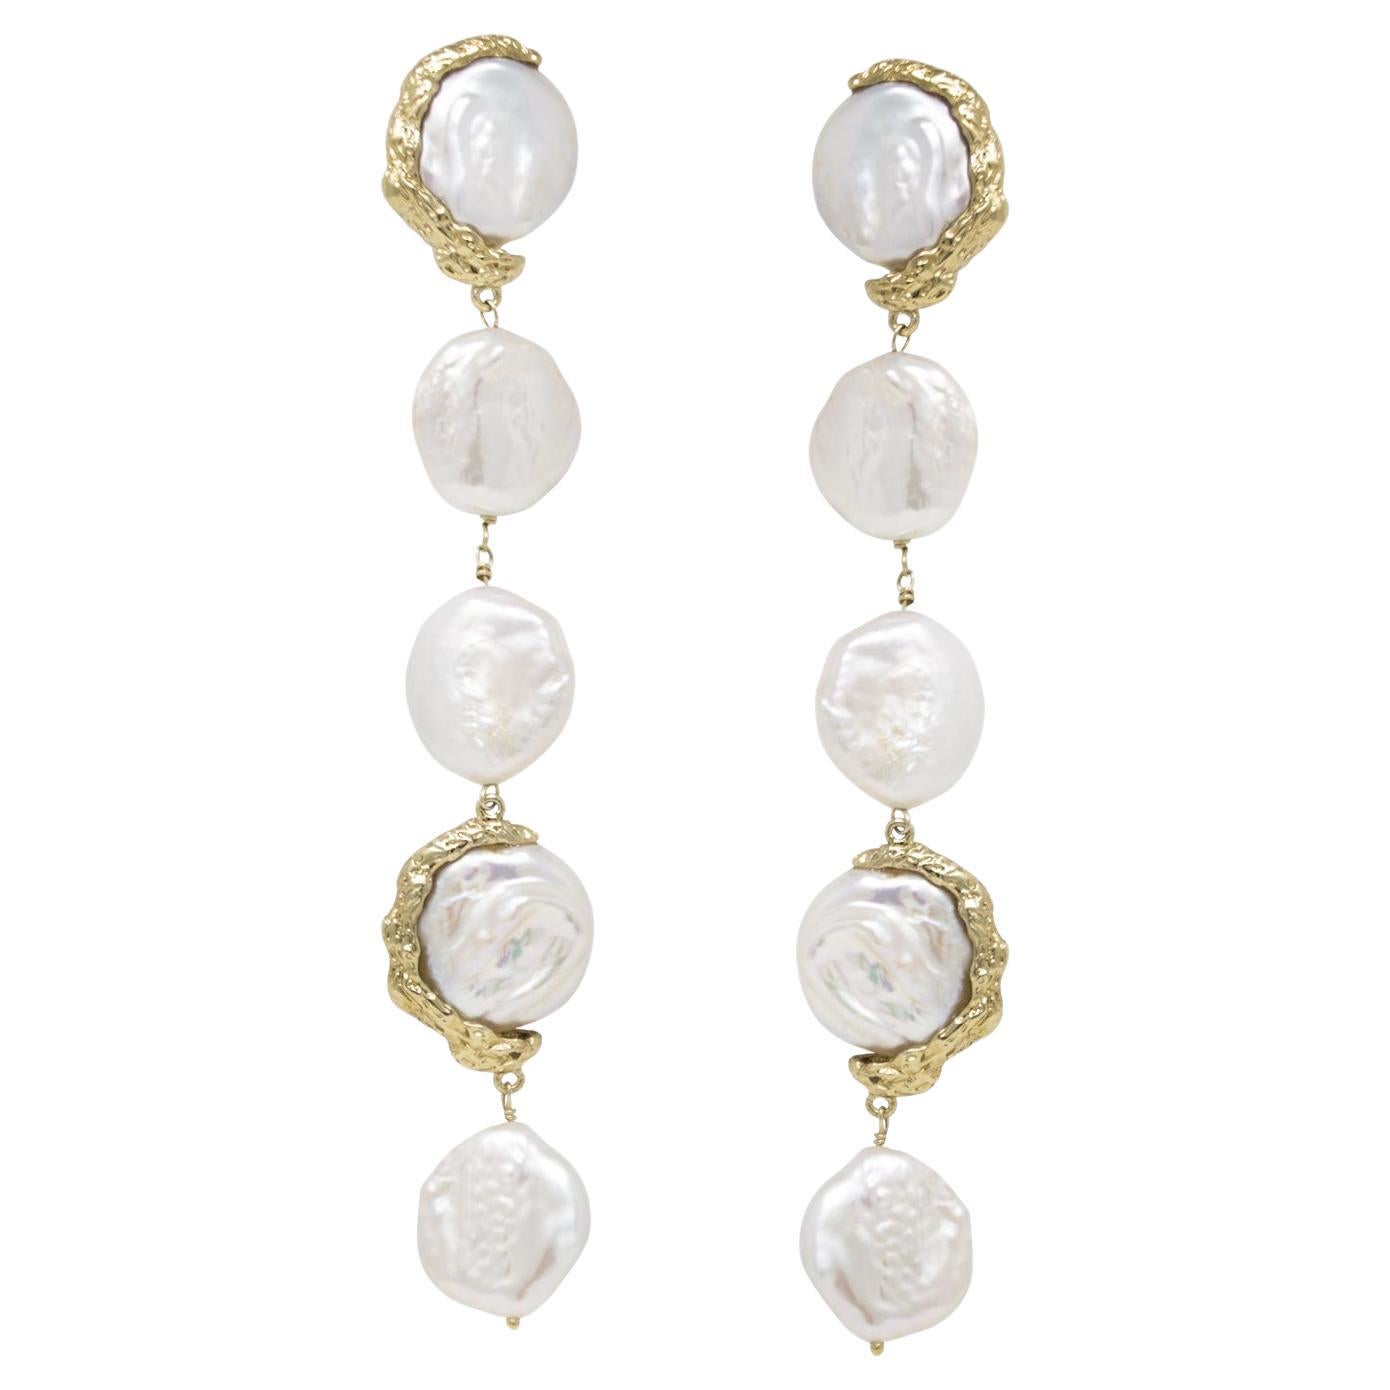 Ad Astra Gold-Plated Pearl Statement Earrings